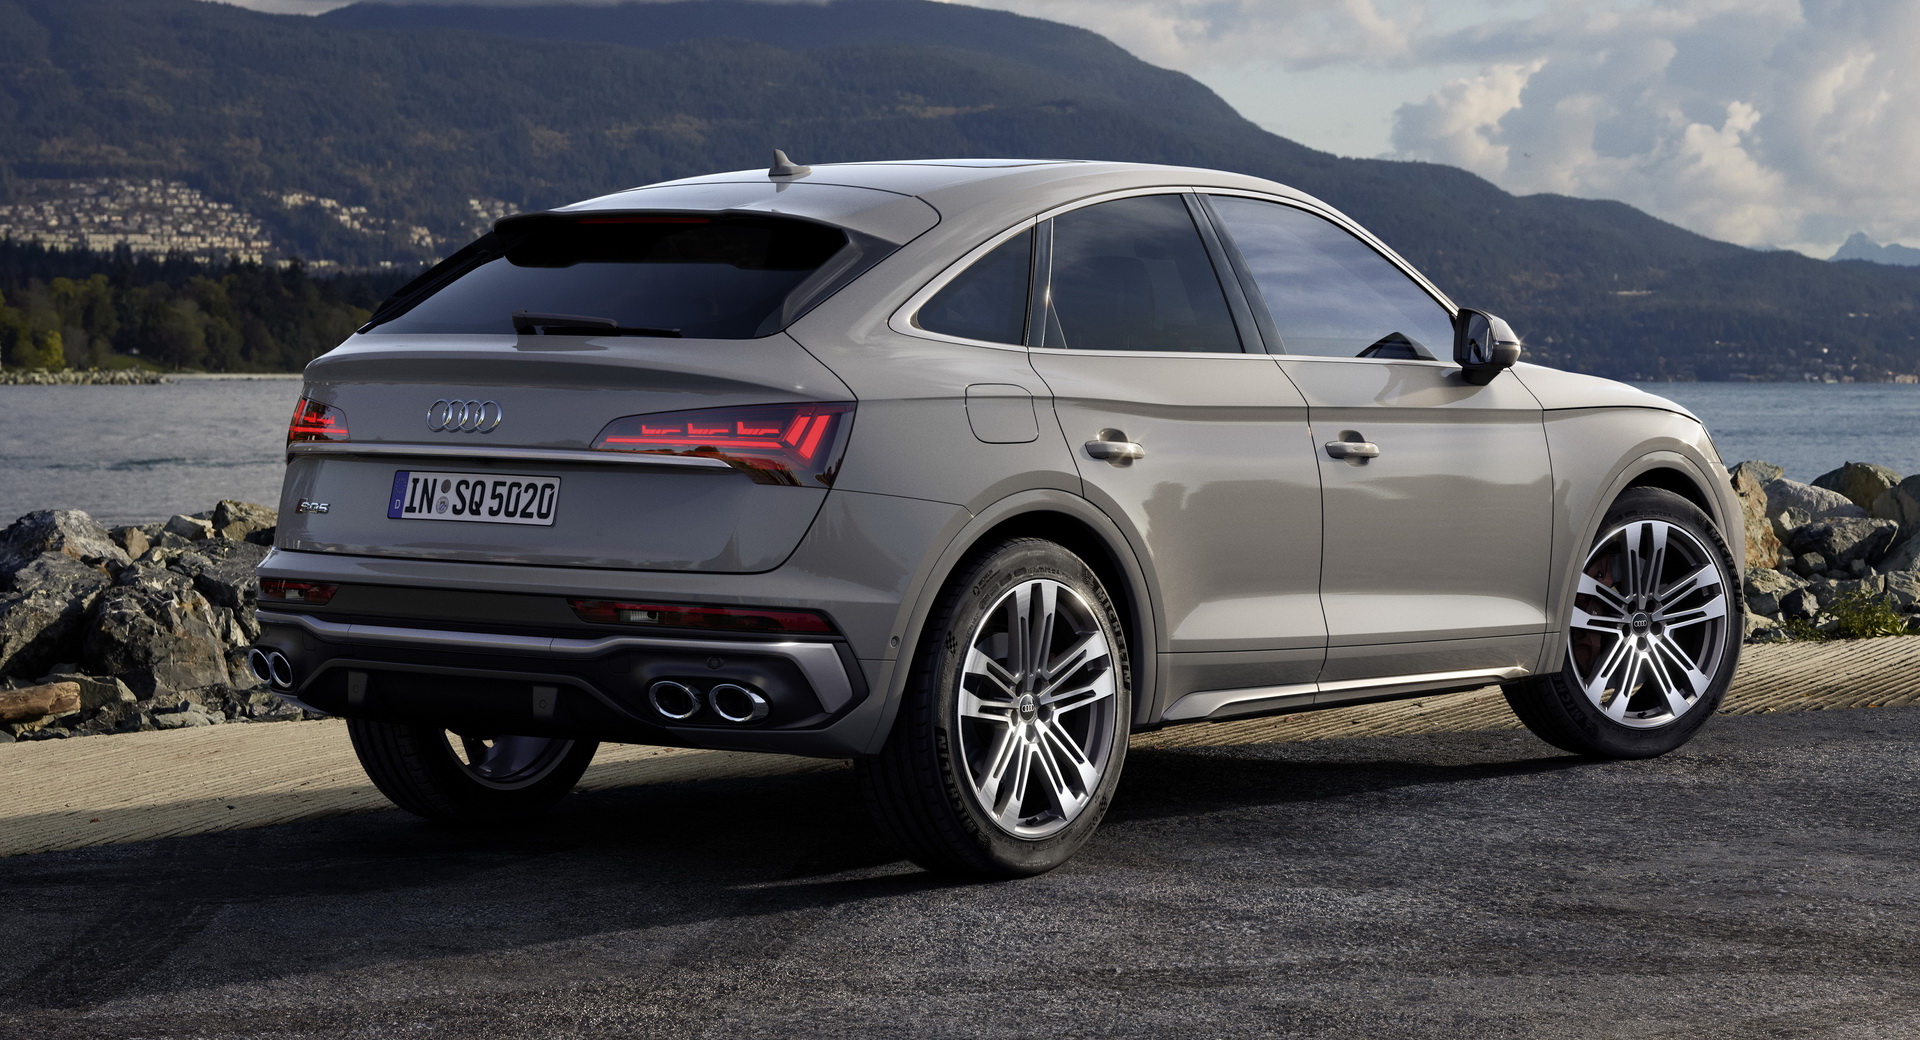 2021 Audi Q5 And SQ5 Sportback Are The Latest SUV Coupes To Go On